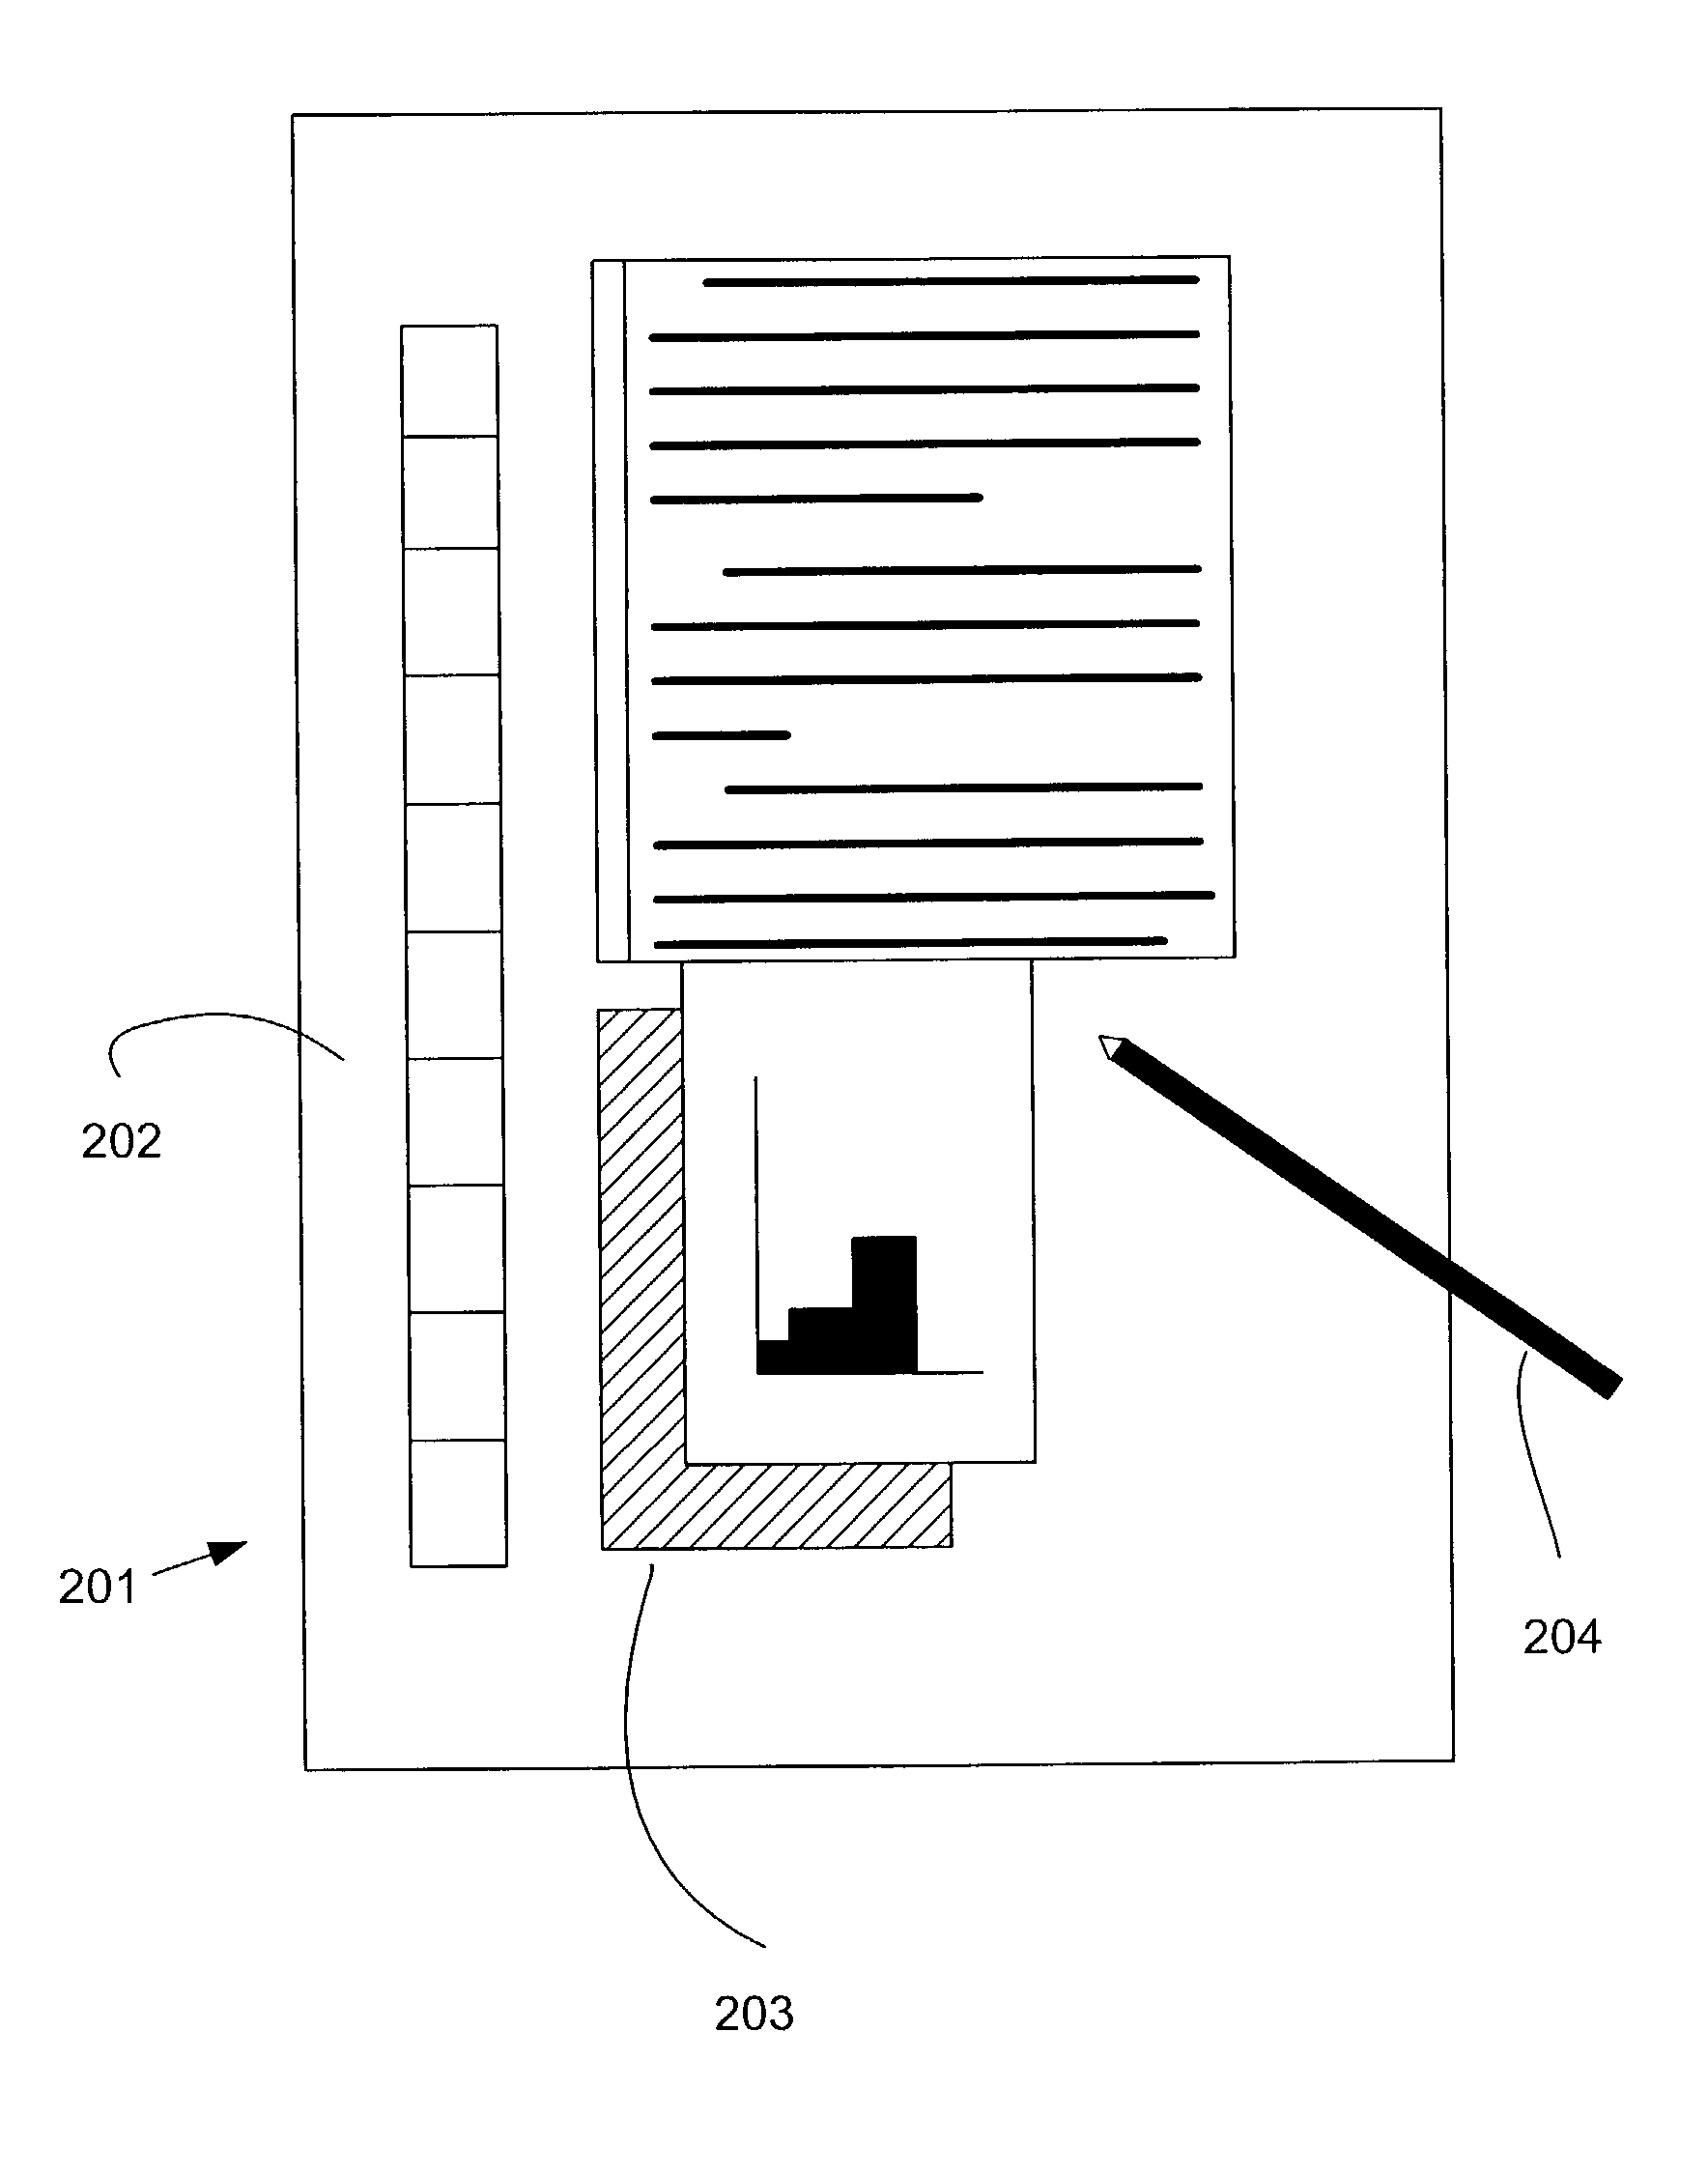 Entry and editing of electronic ink